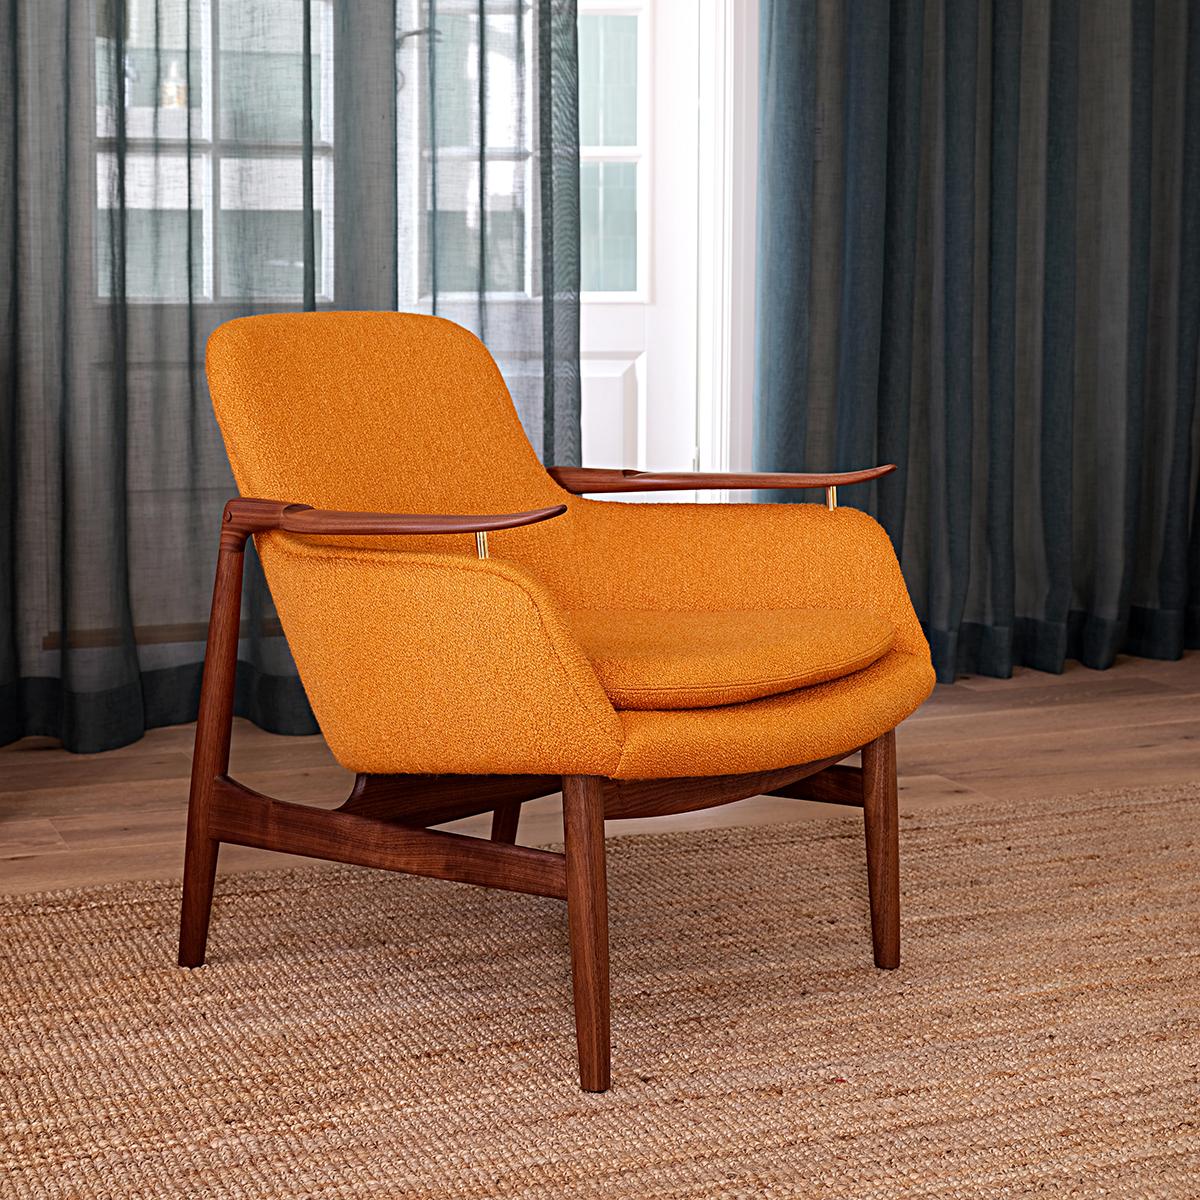 Chair designed by Finn Juhl in 1953, relaunched in 2020.
Manufactured by House of Finn Juhl in Denmark.

The FJ 53 is an extravagant piece of furniture. It integrates the lightness and elegance of a wooden chair with an upholstered corpus, to